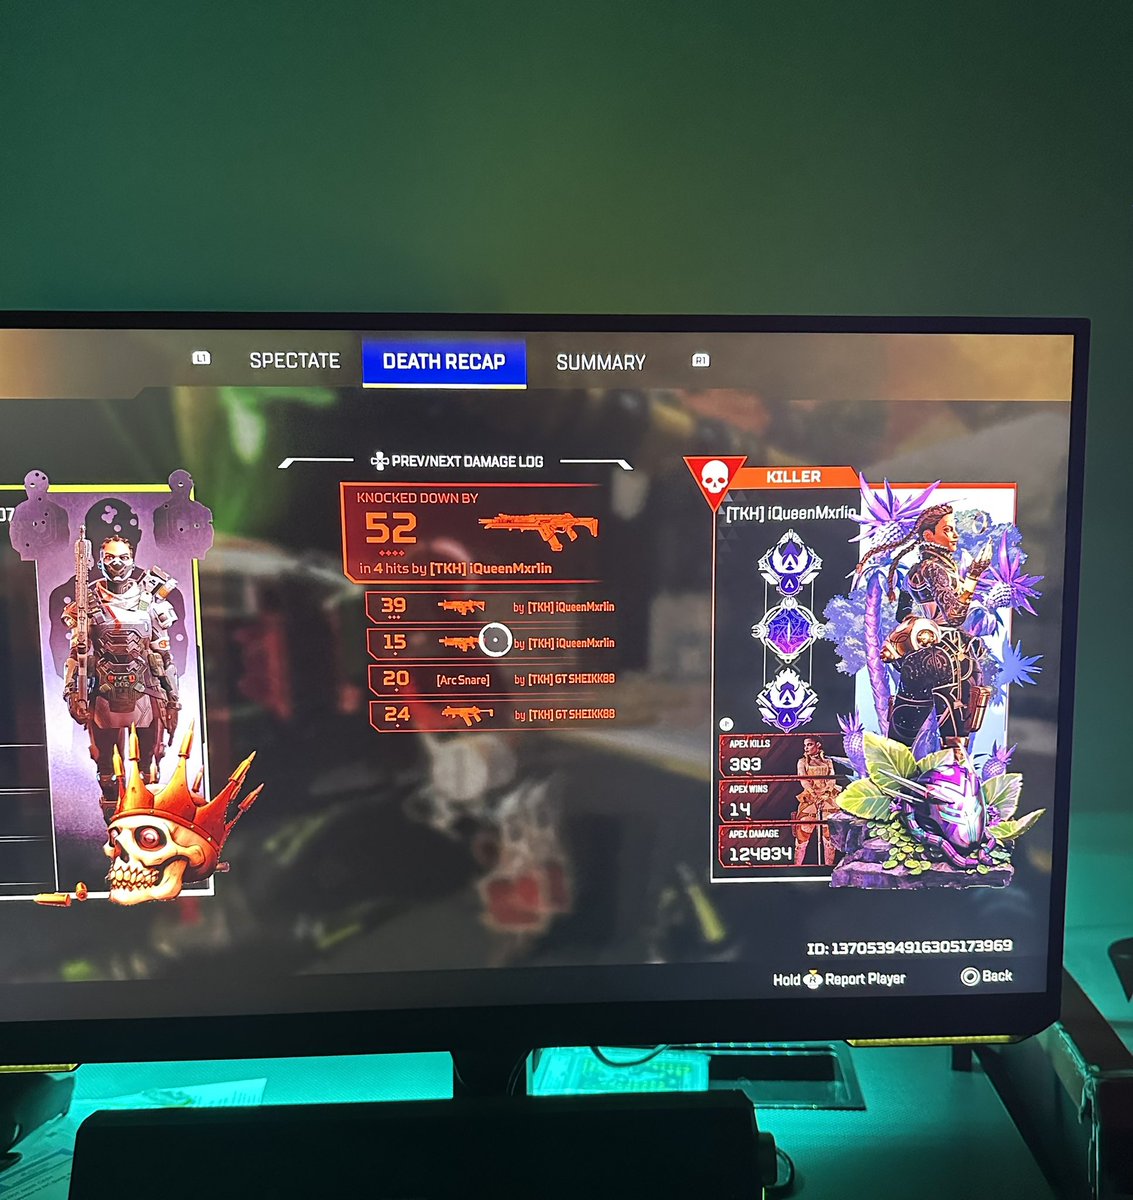 THIS‼️‼️ is a Prime example of why I can’t play apex legends anymore. Matchmaking is so fuckin shit! Look at my team vs who I’m killed by. Left to 1v3 every fuckin time. @PlayApex @ea @Respawn